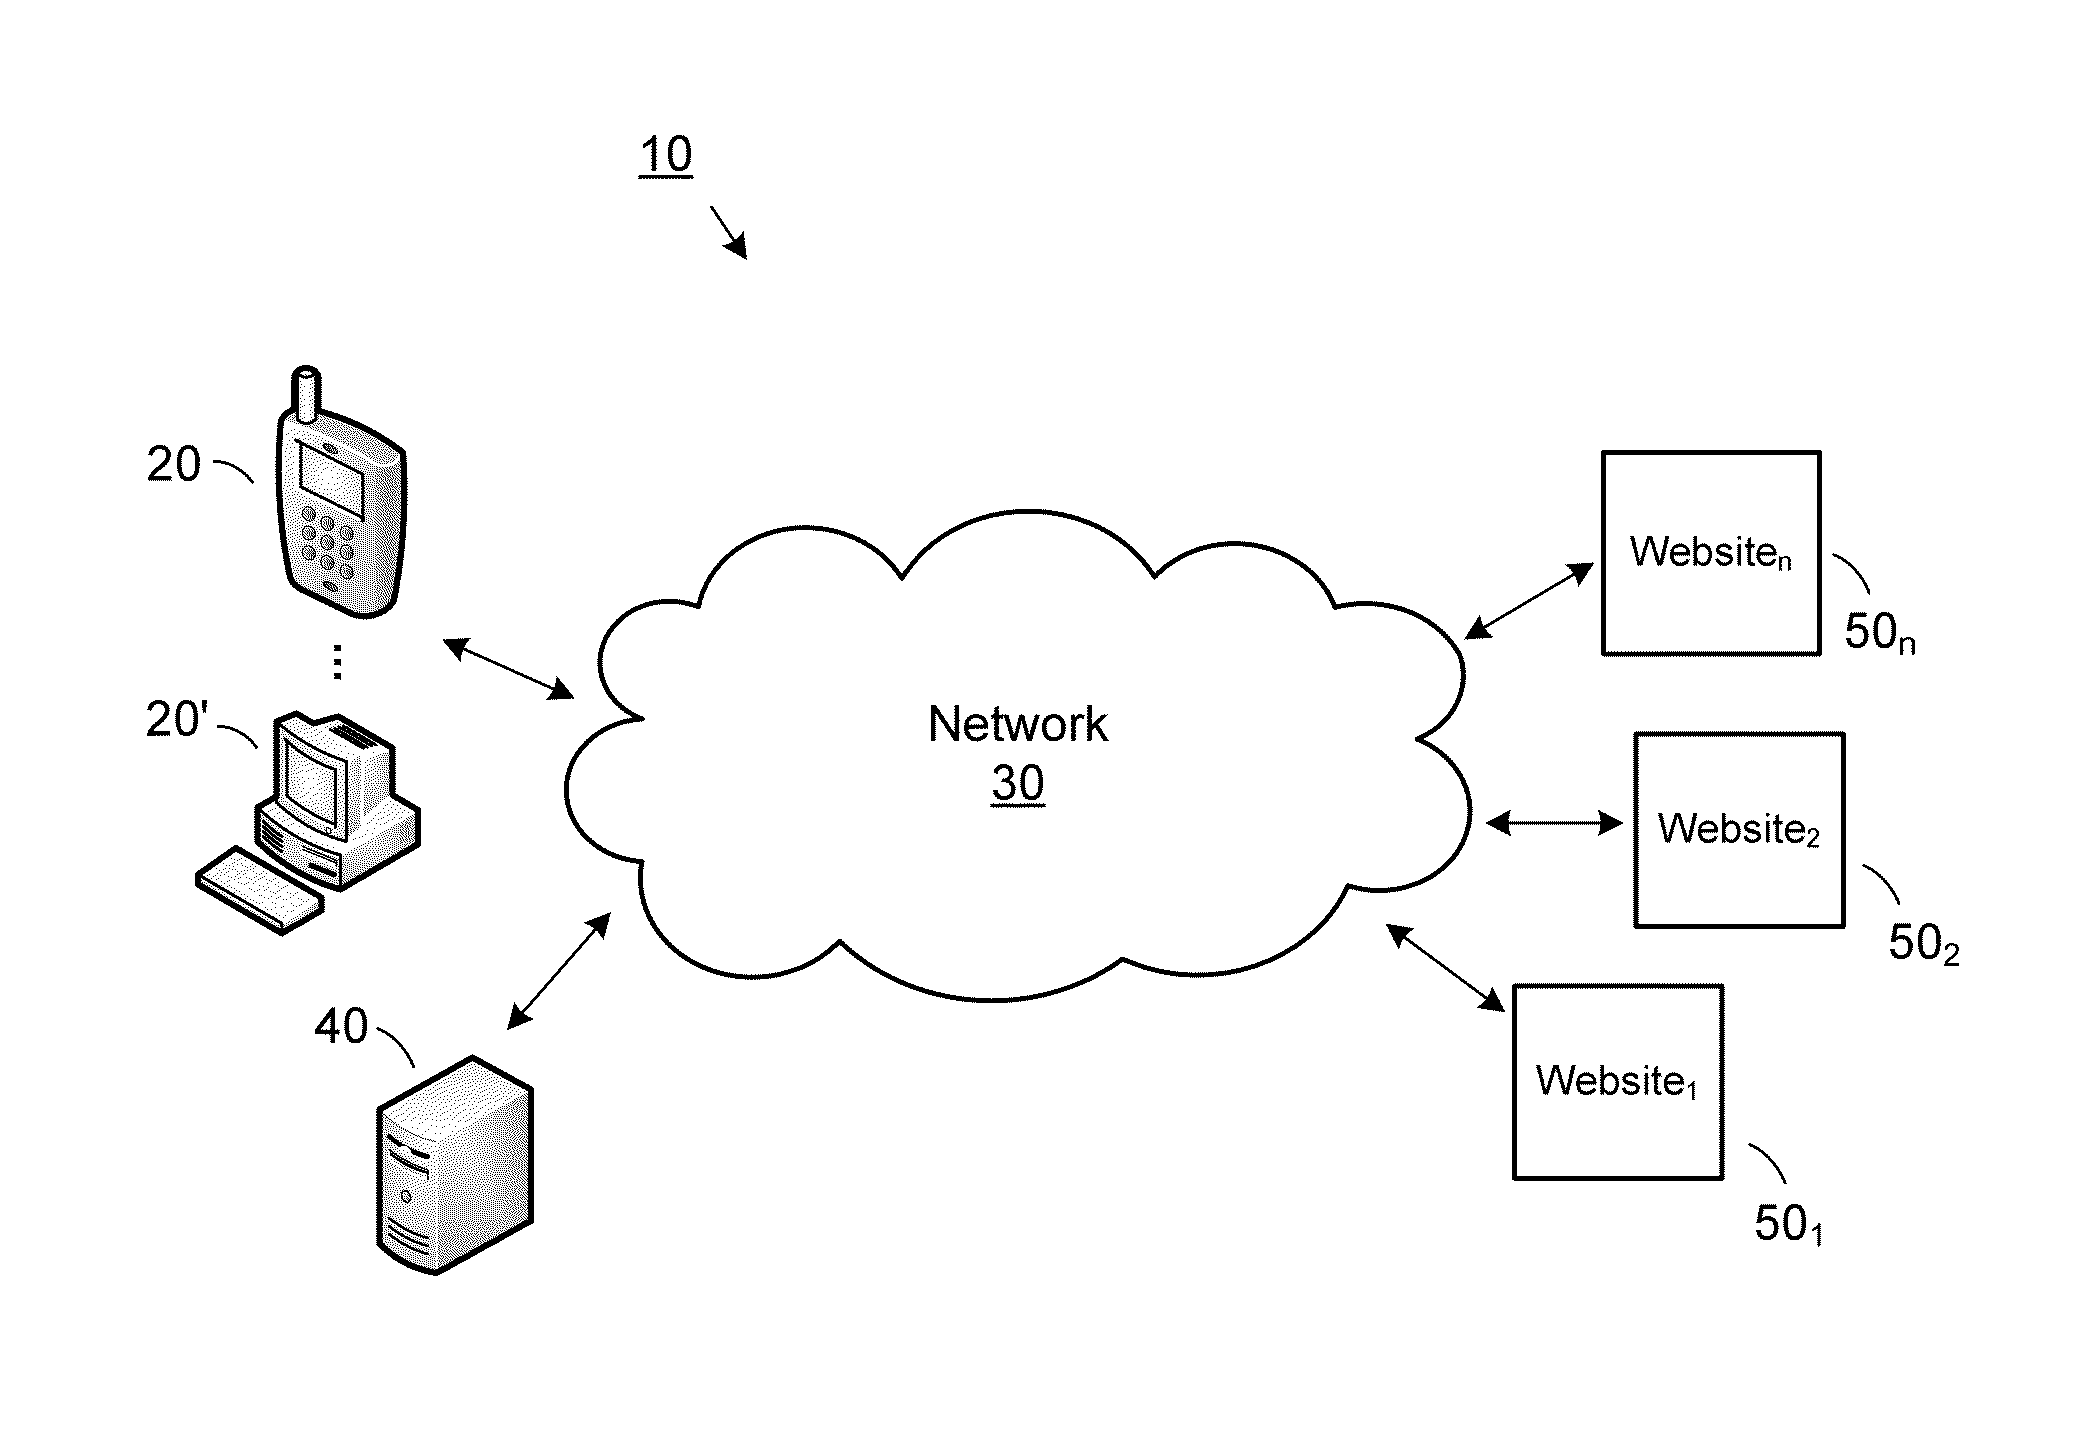 Systems, methods, and computer readable media for single sign-on (SSO) using optical codes